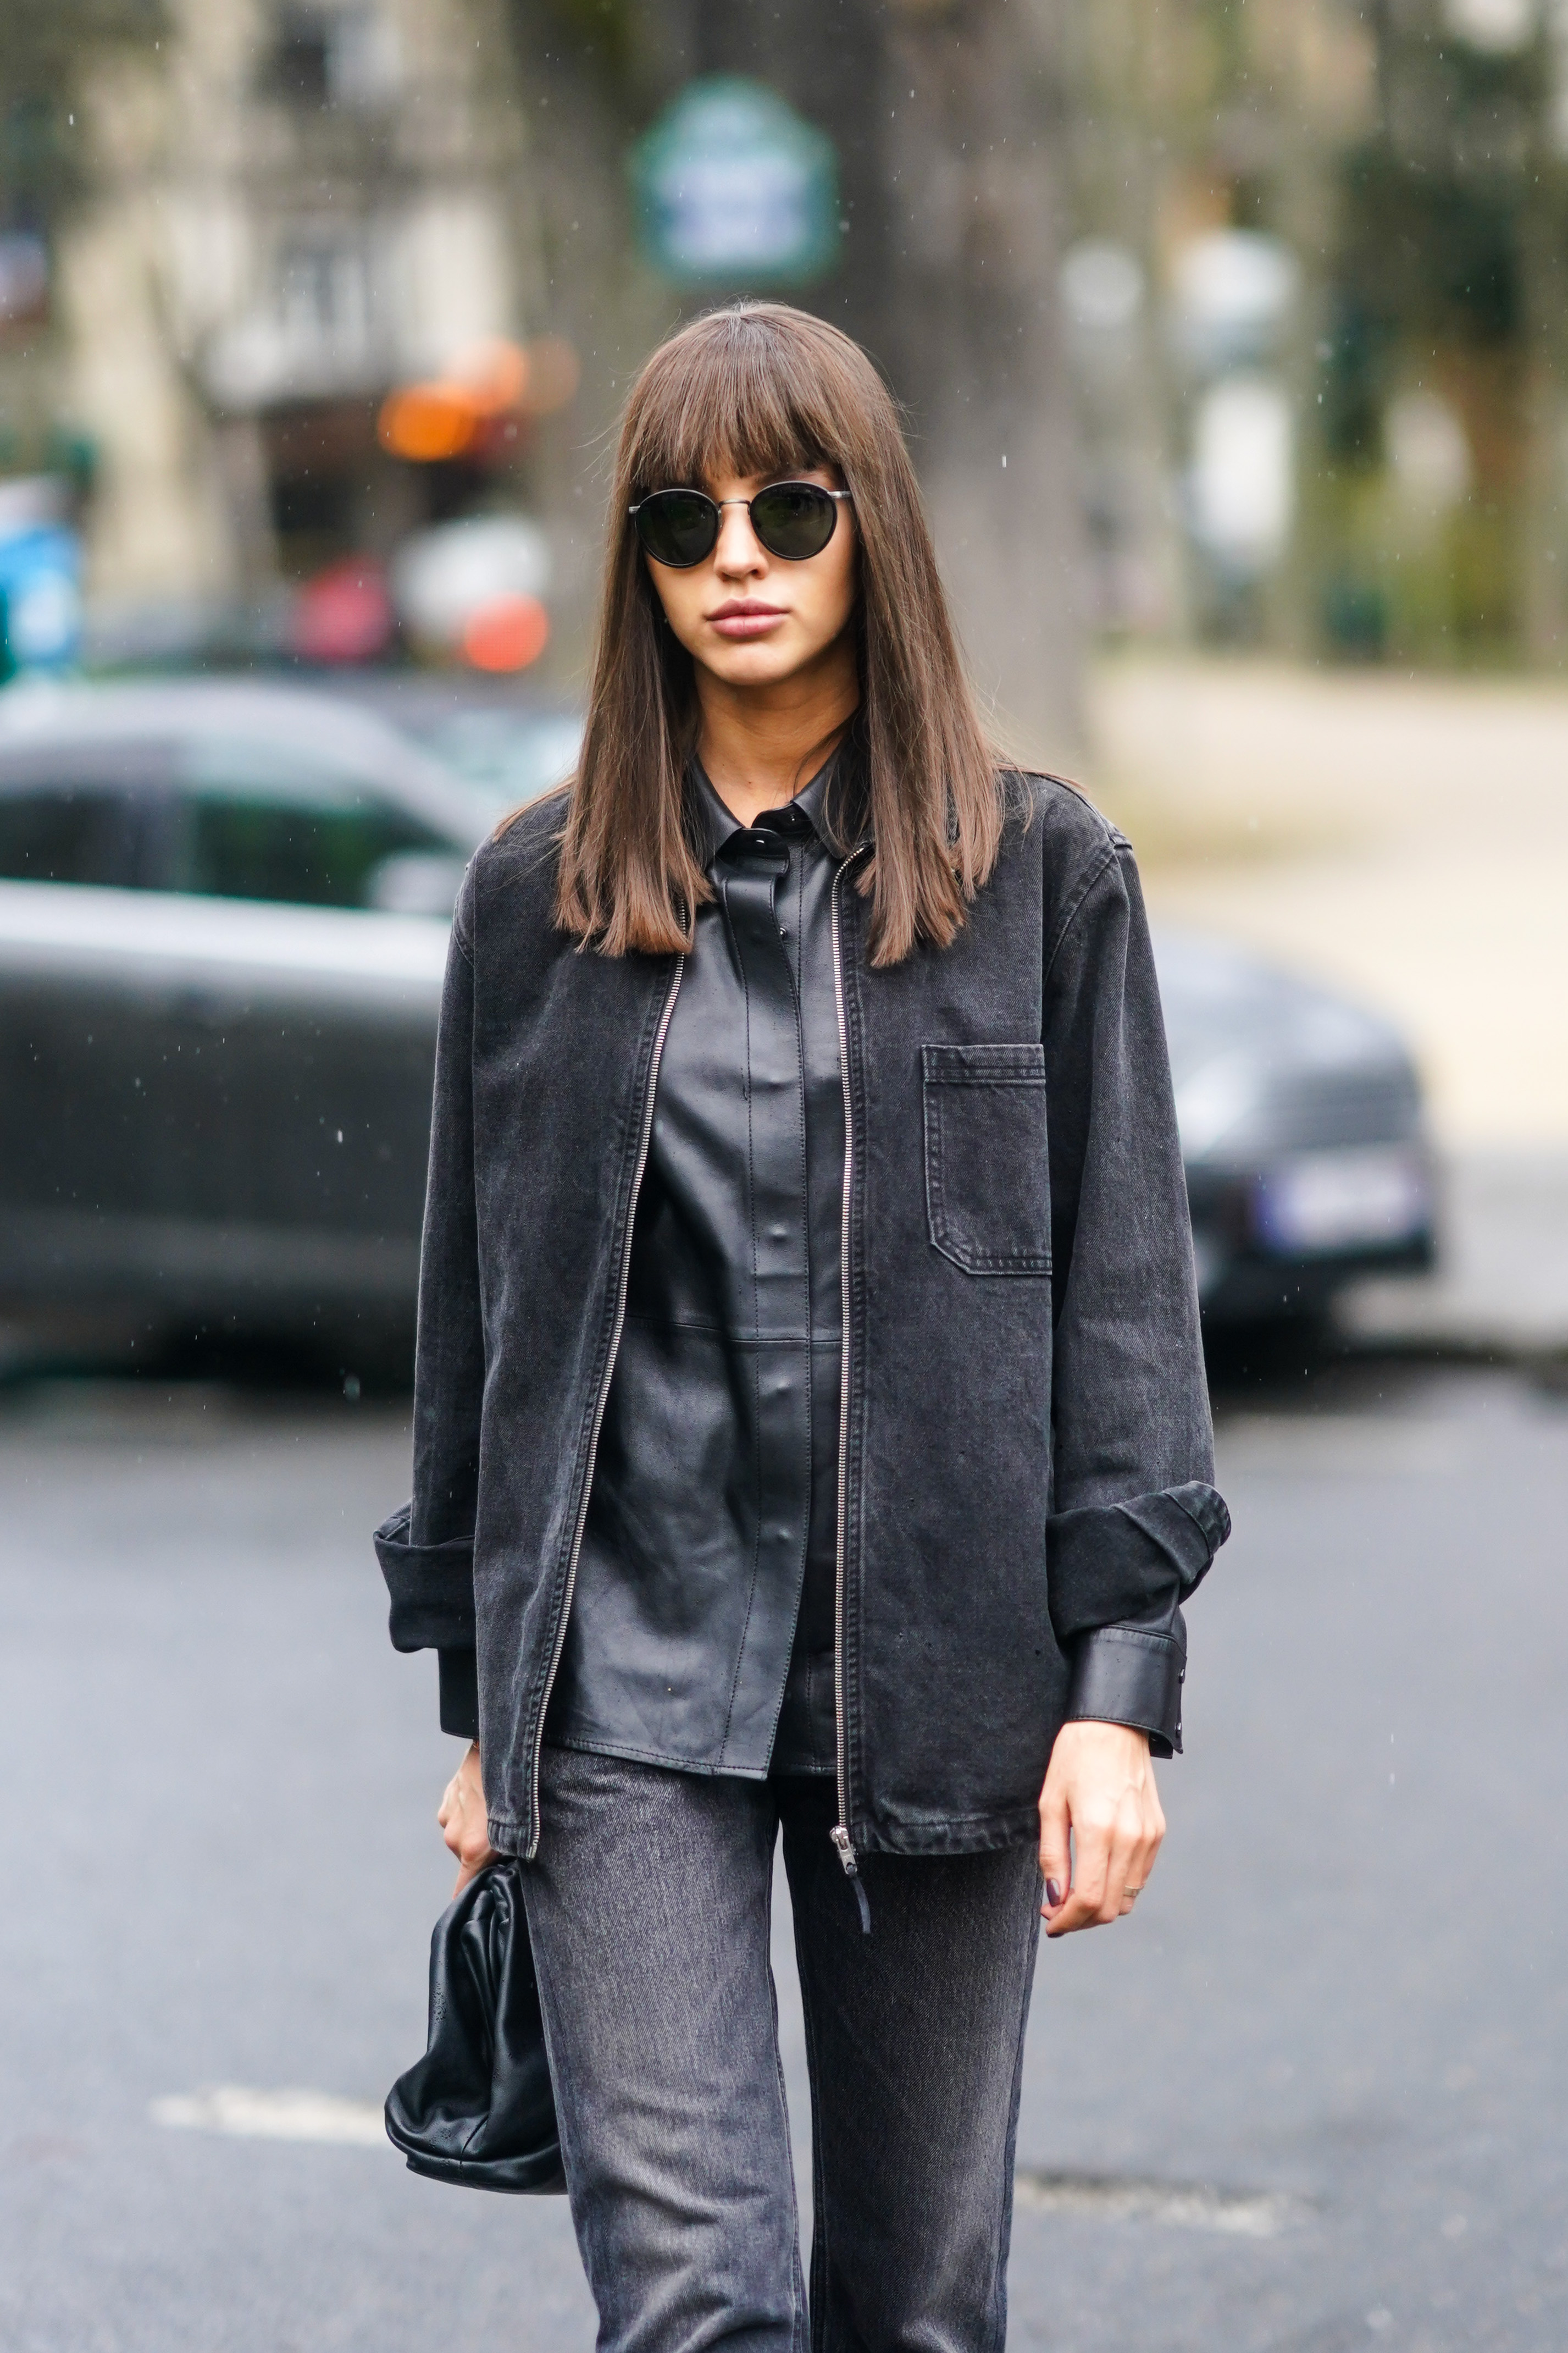 Sharing an Easy Chic Black Denim Jacket Outfit For Fall-sgquangbinhtourist.com.vn